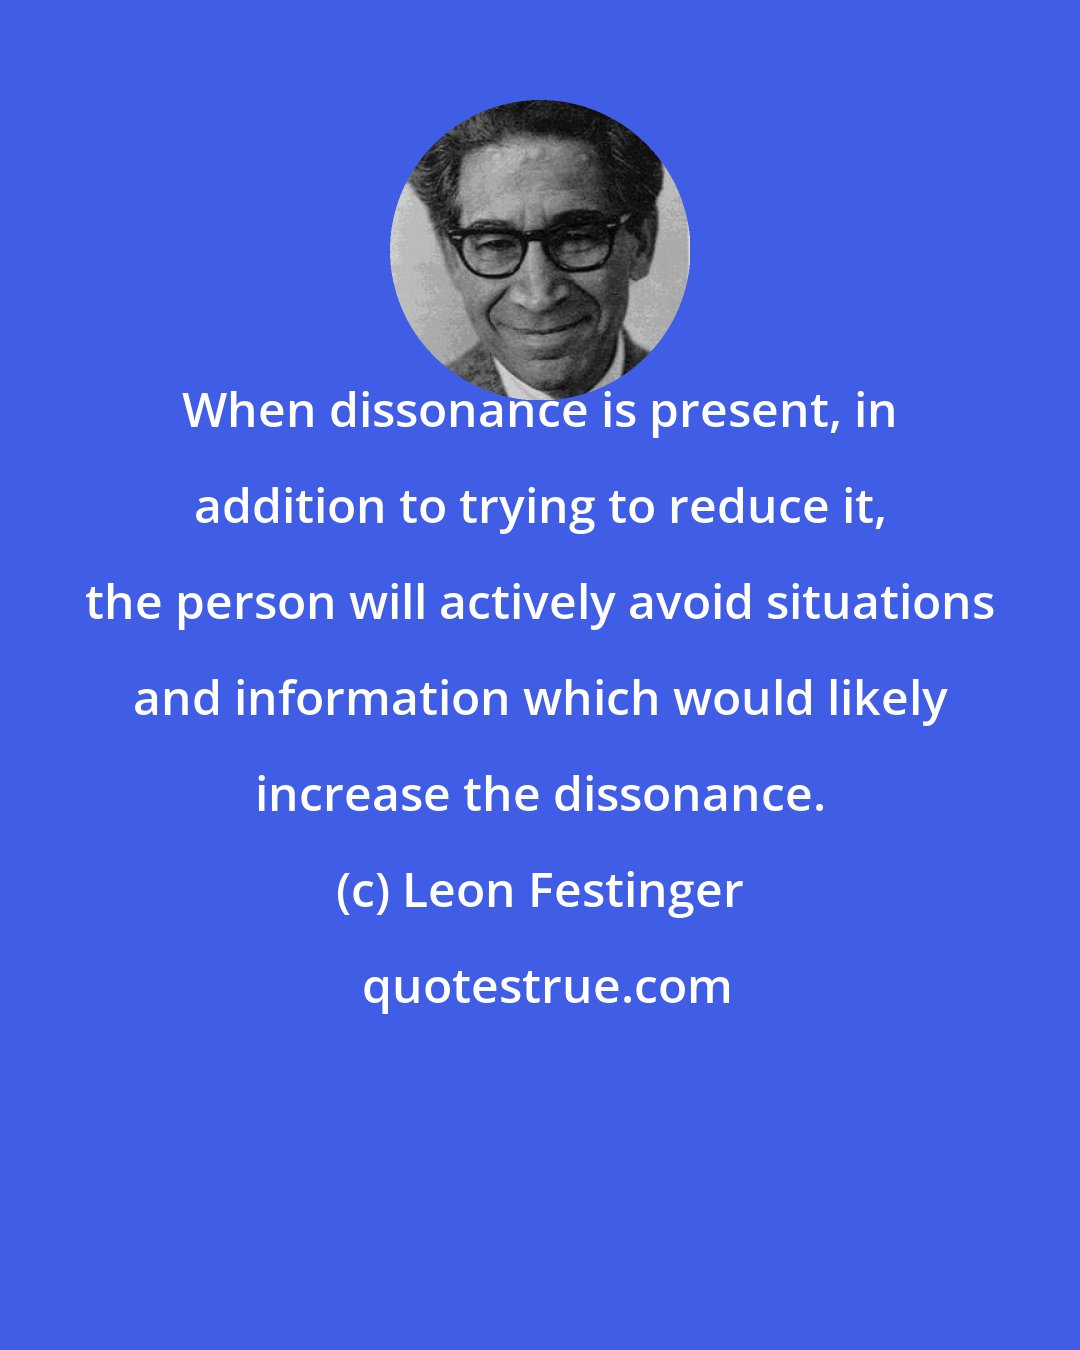 Leon Festinger: When dissonance is present, in addition to trying to reduce it, the person will actively avoid situations and information which would likely increase the dissonance.